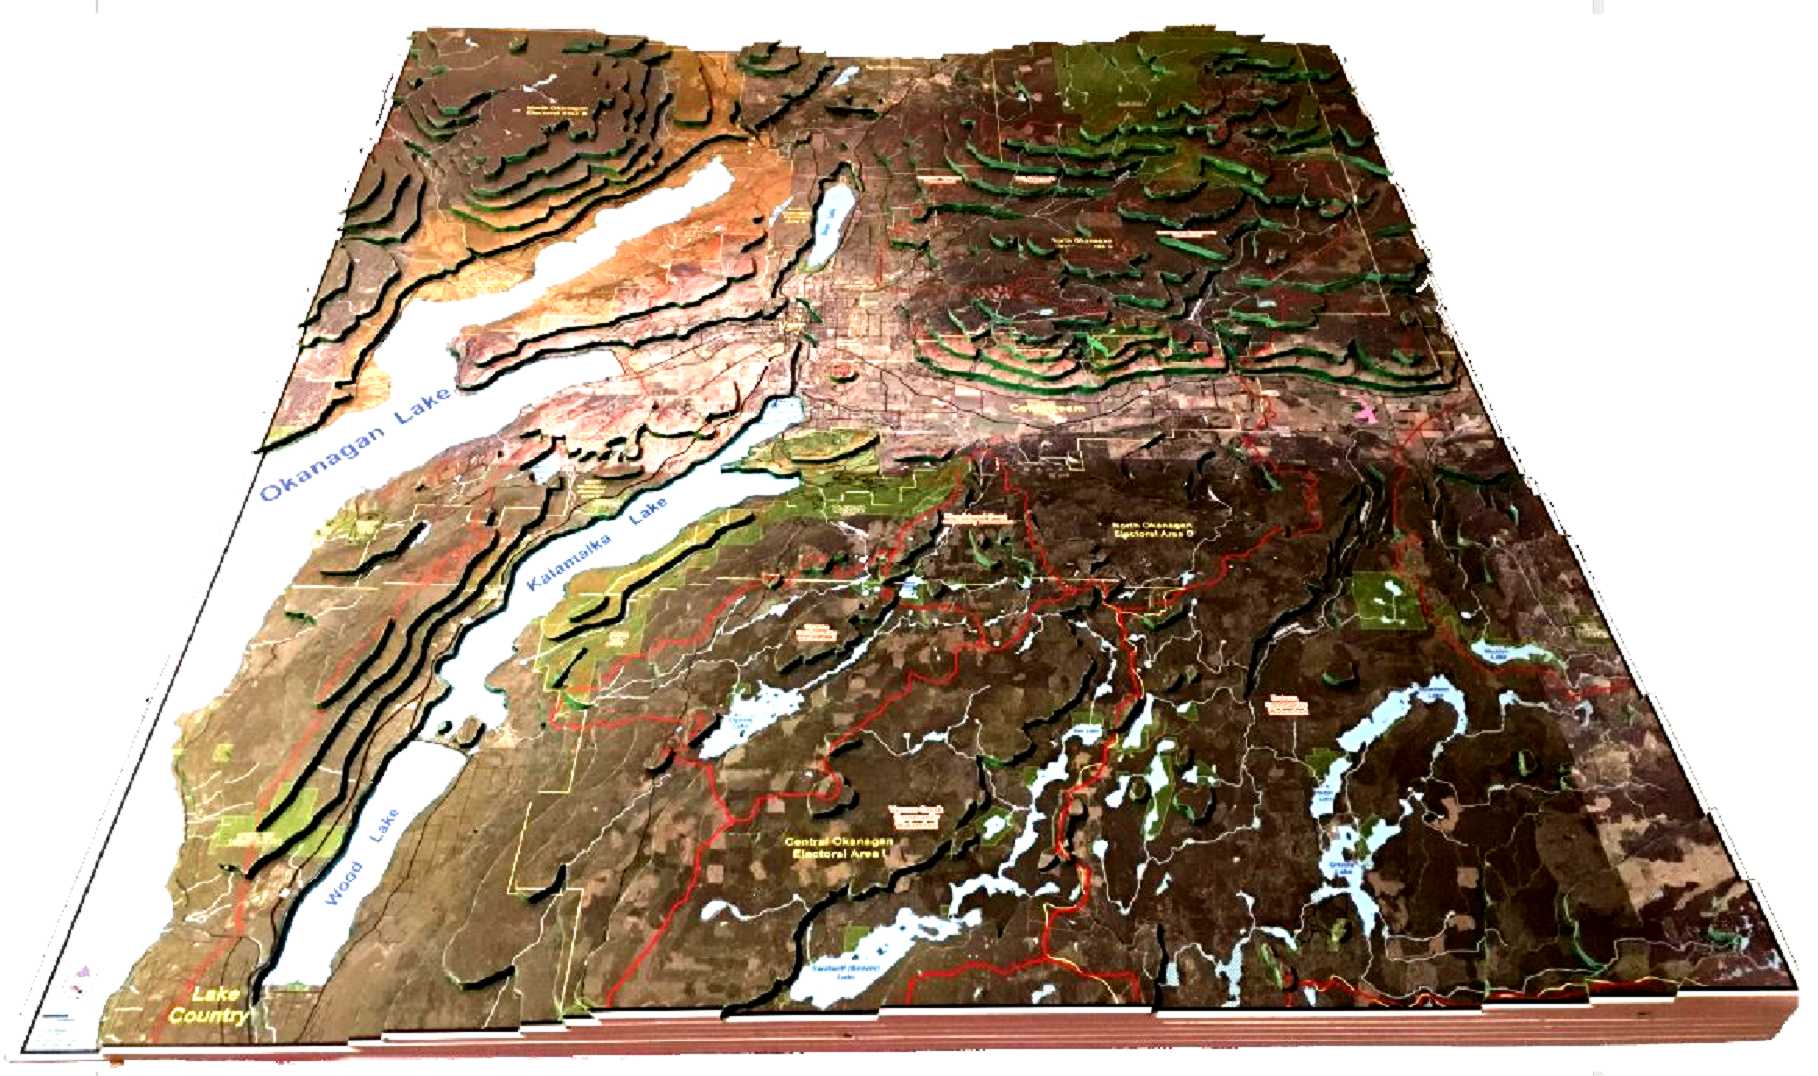 3D Model of the Greater Vernon Watershed area